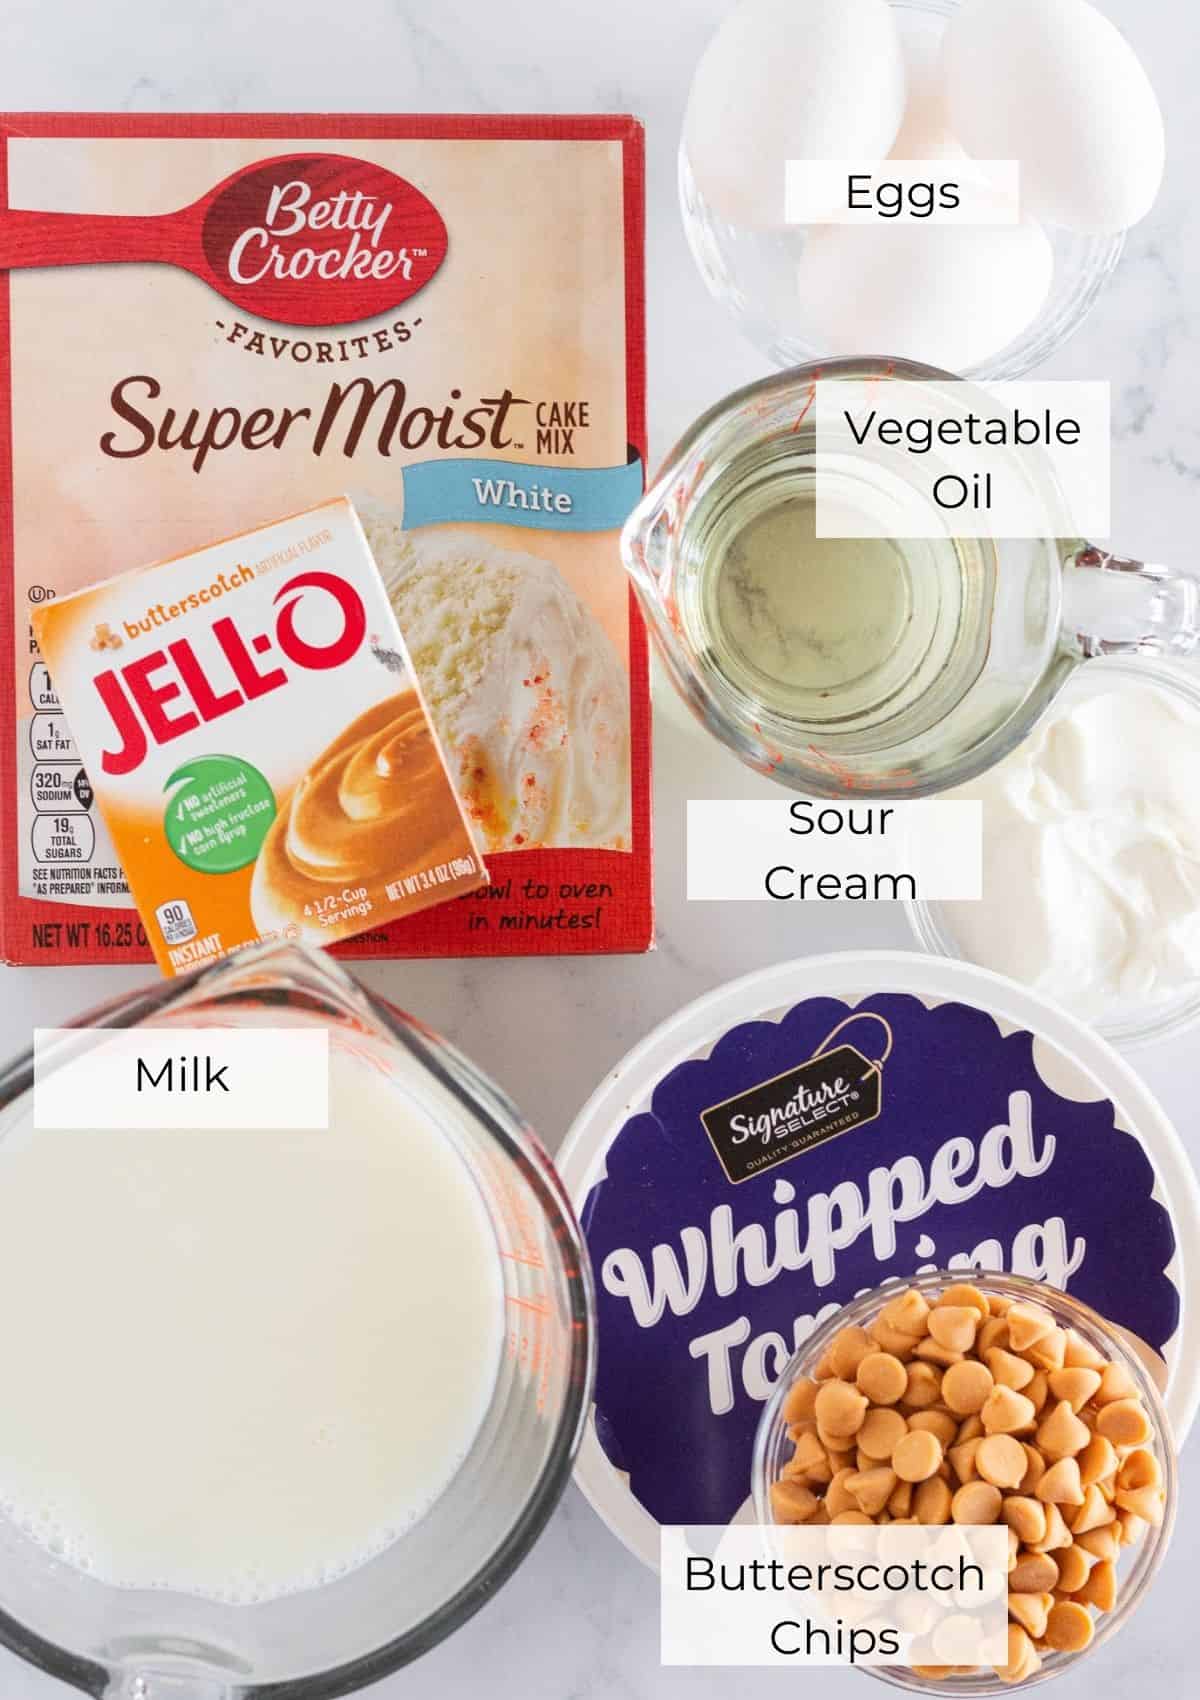 The ingredients needed to make a butterscotch cake.